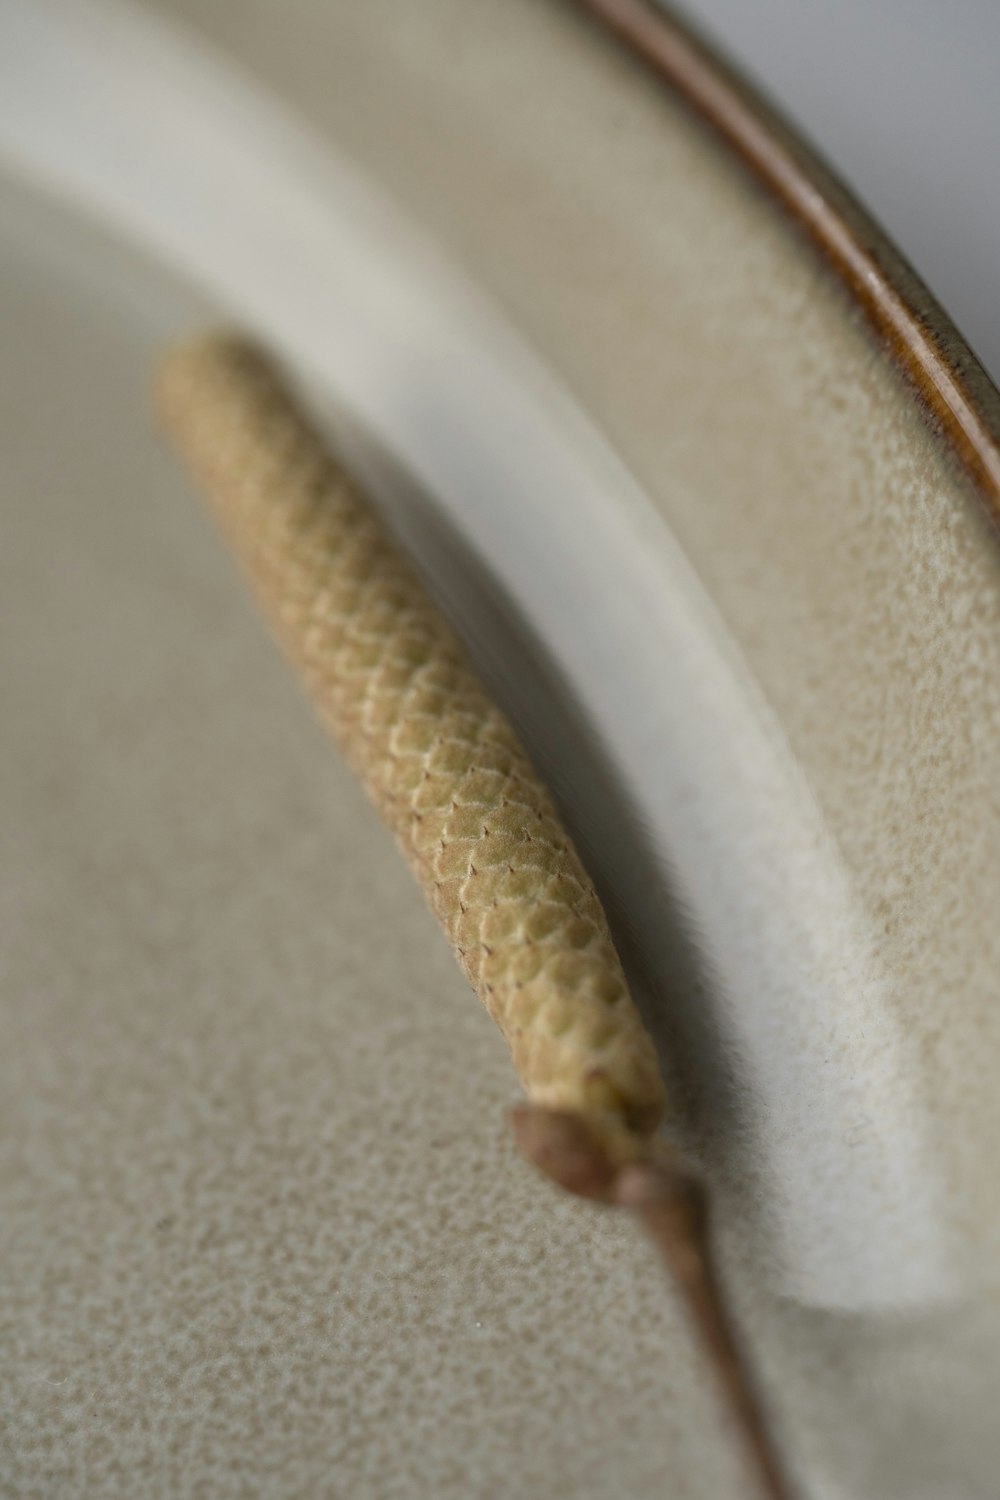 a close up of a plate with a small object on it